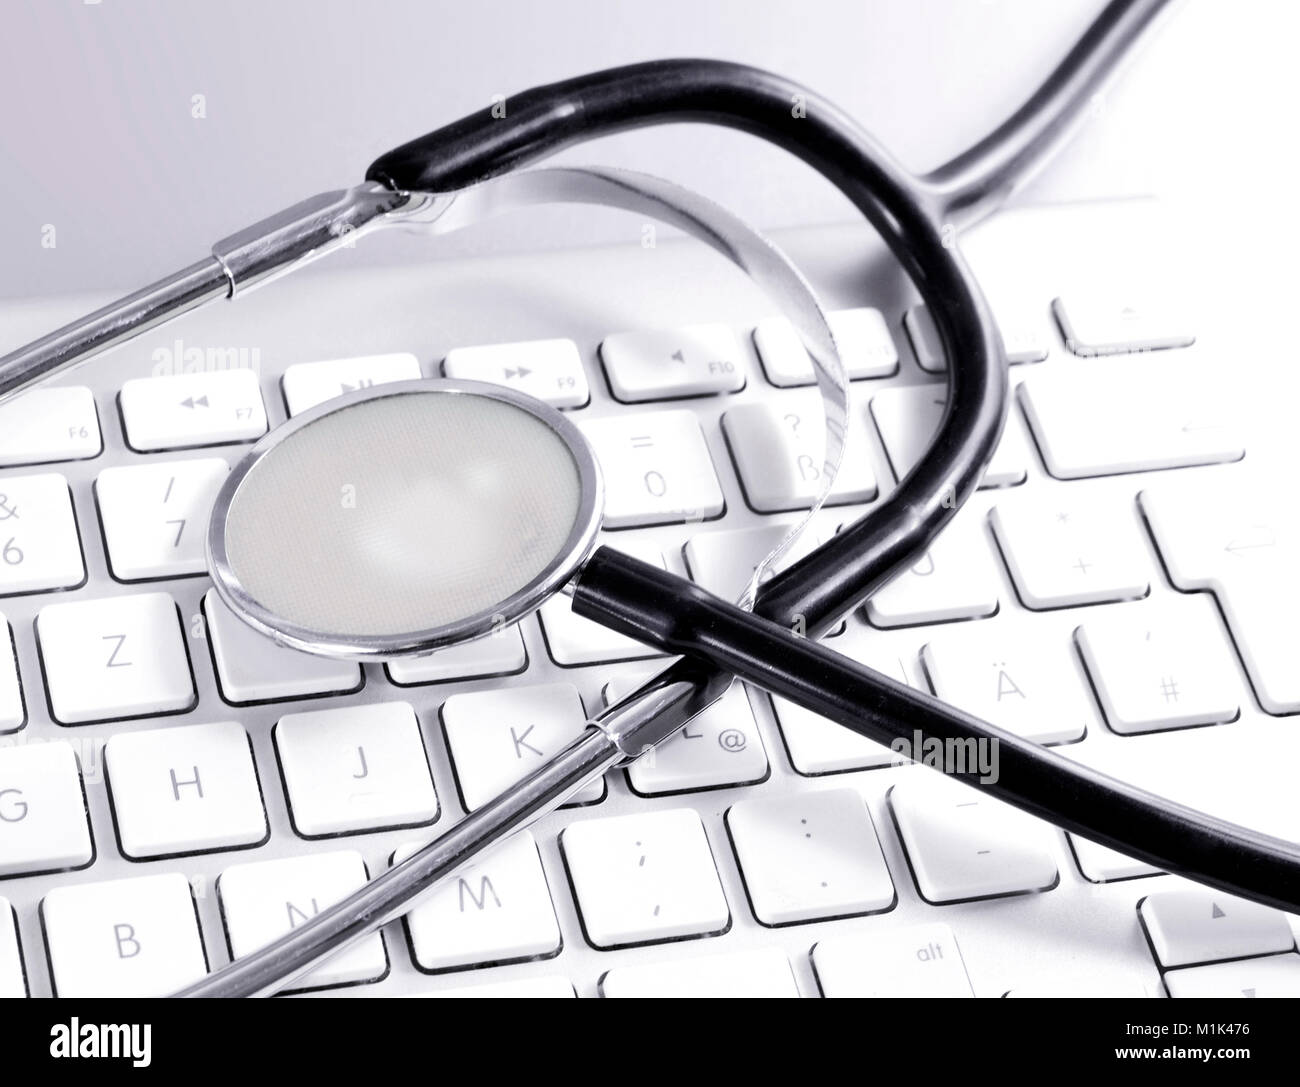 It support, stethoscope and computer keyboard or keypad. Close-up shot of medical equipment. Stock Photo